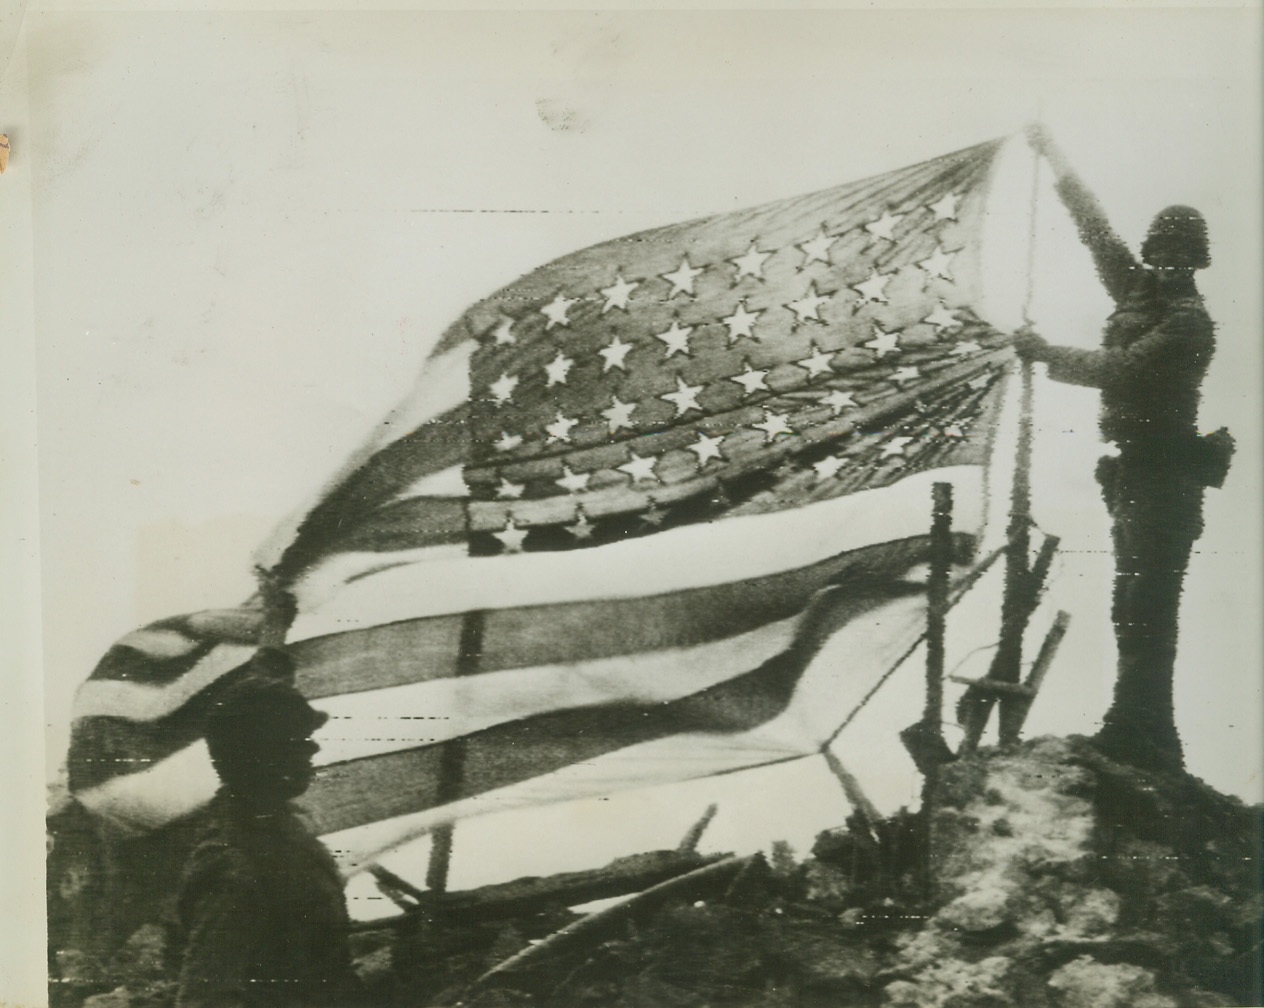 “Old Glory” raised over Cezembre, 9/5/1944. France – The Stars and Stripes are raised over the small French island of Cezembre after German forces had surrendered. Pfc. Richard T. Franz (right), Oswego, N.Y., raises the flag as Pfc. David Snyder of Wilkes Barre, Pa., looks on. The War Department places Cezembre just west of St. Malo off the north coast of Brittany. Credit (Army Radiotelephoto from ACME);